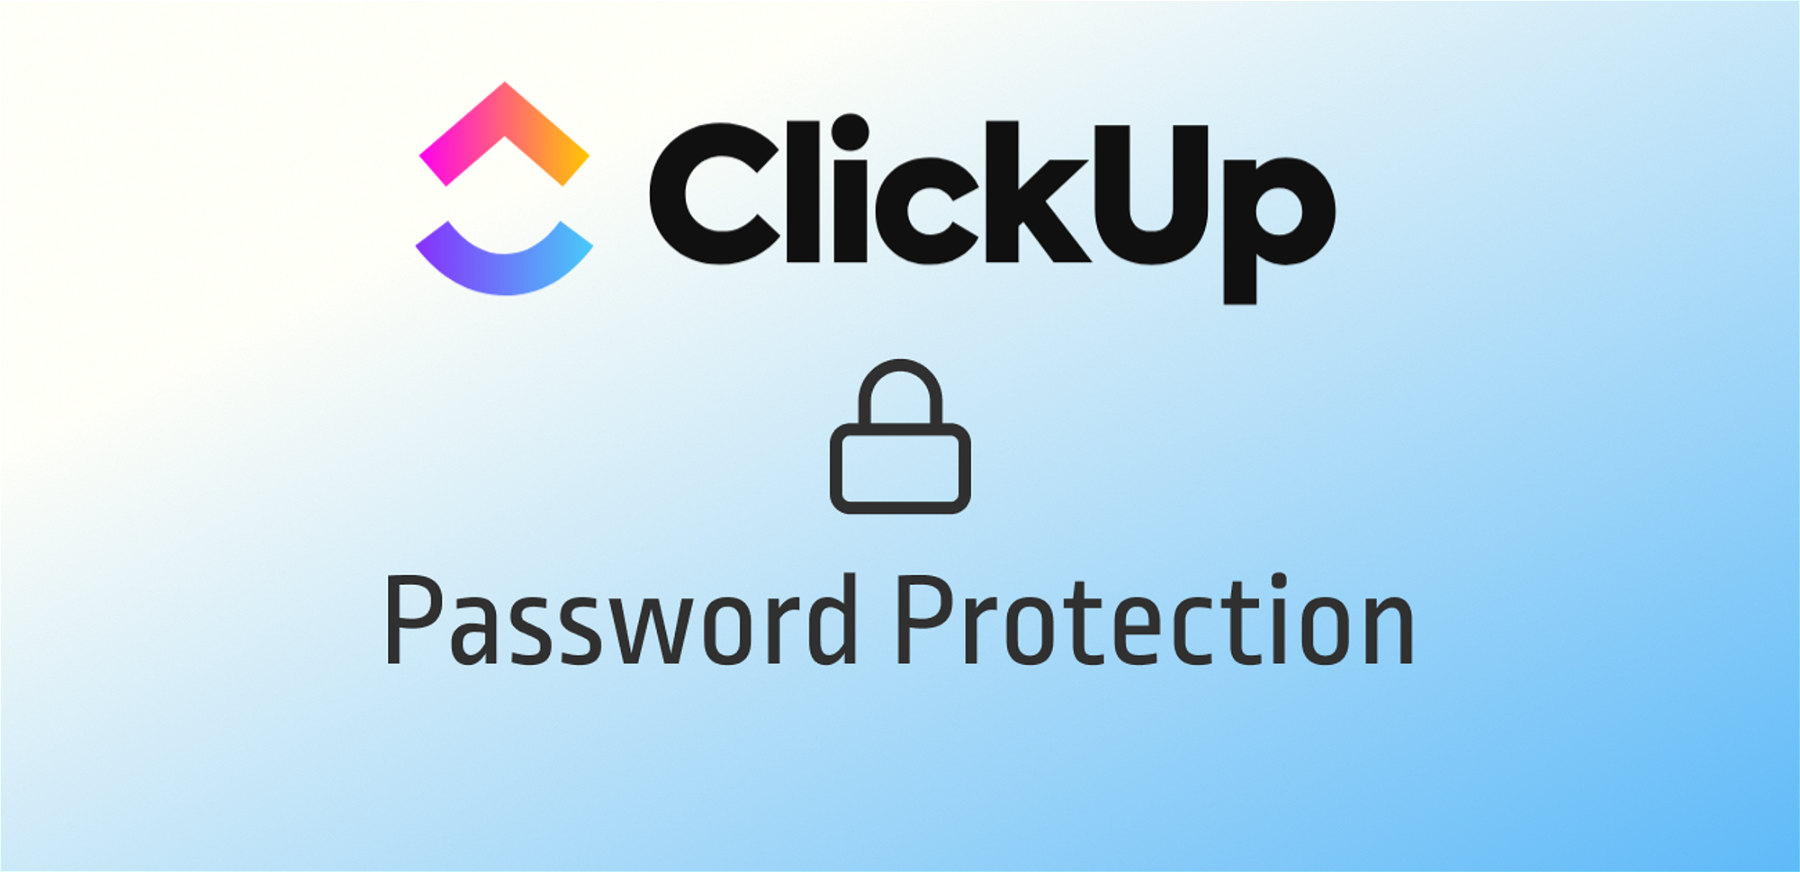 How to password protect a ClickUp document